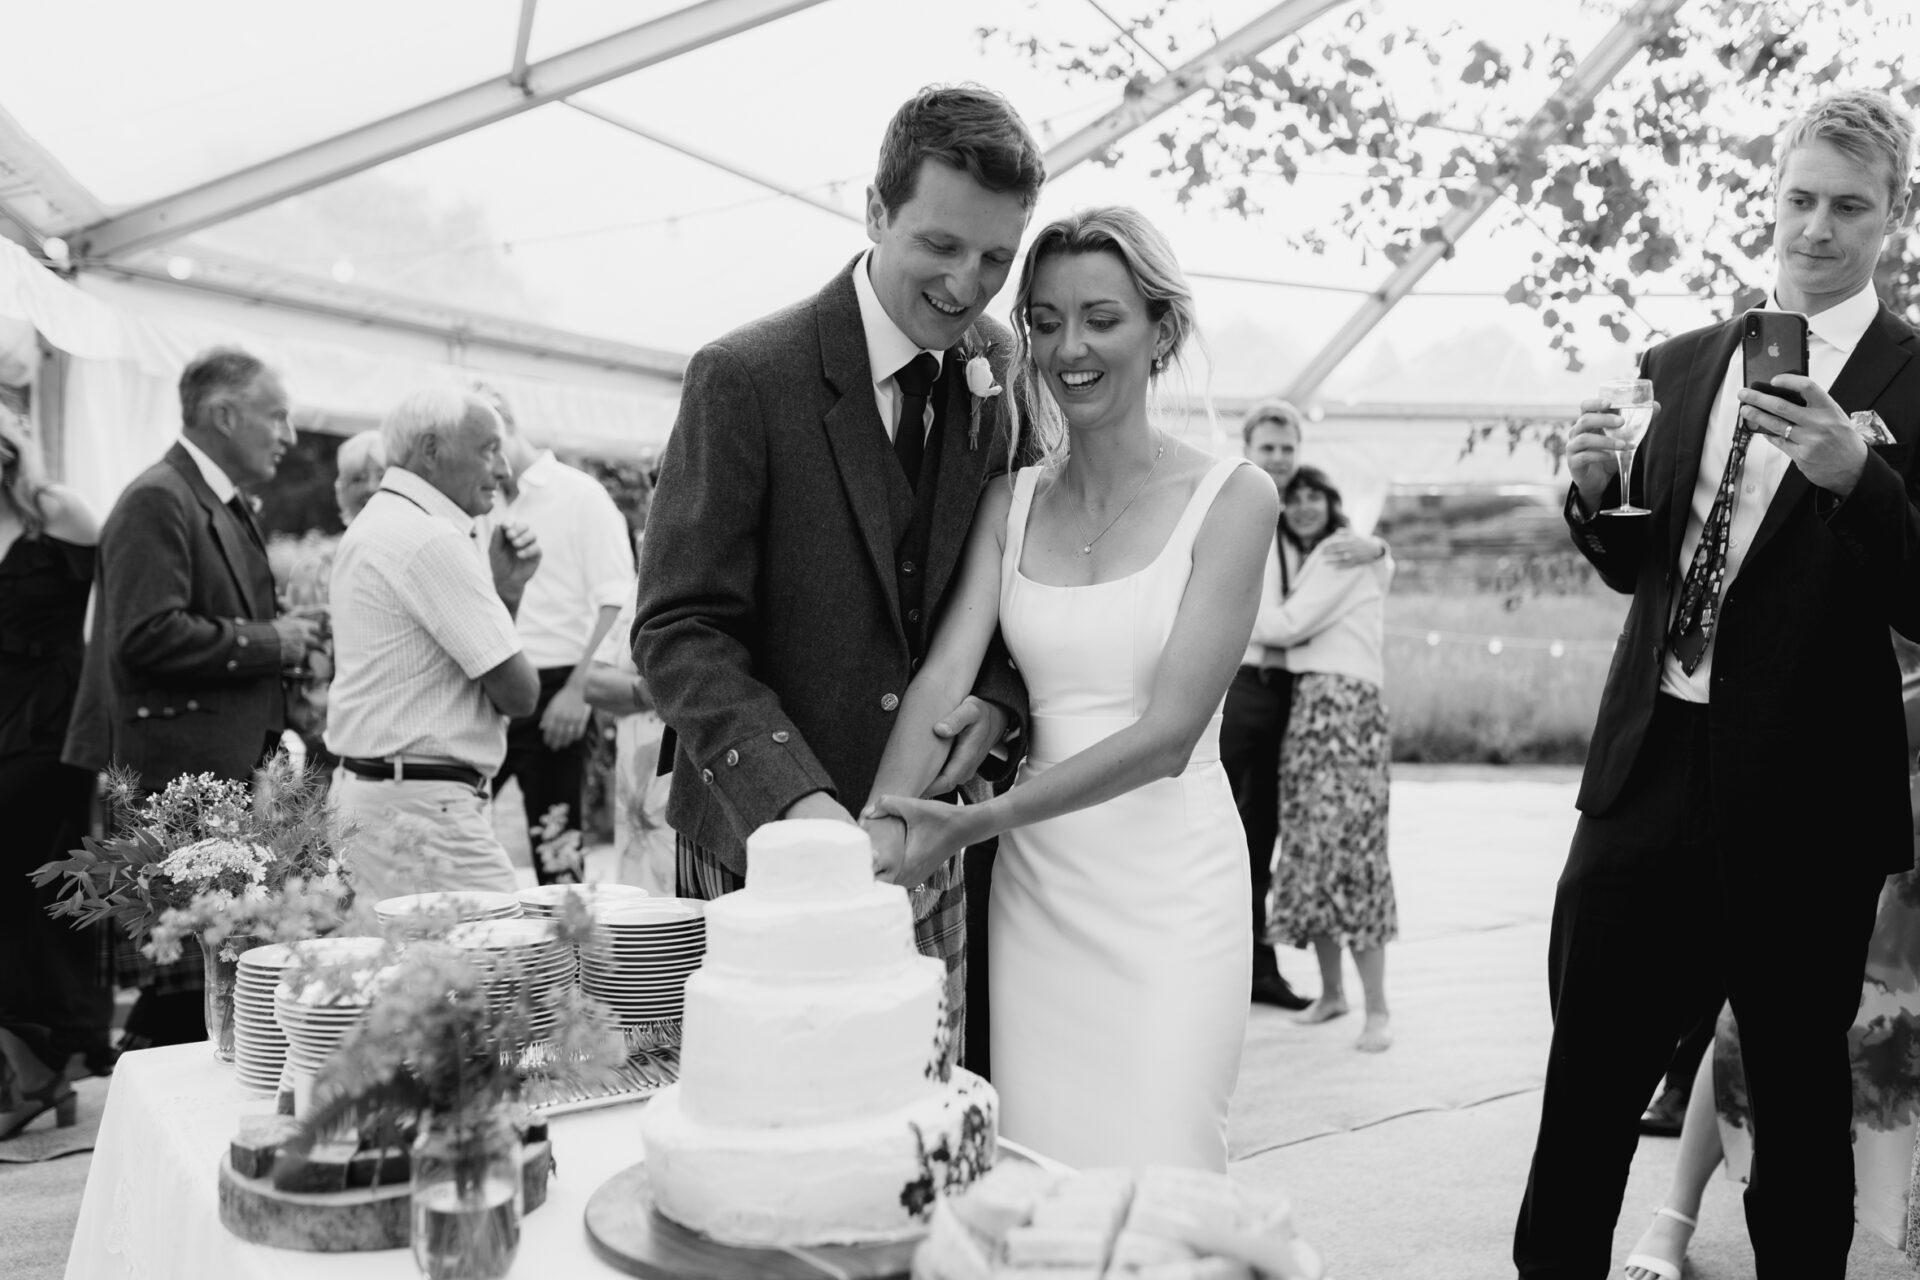 The bride and groom cut the cake at their Devon marquee wedding